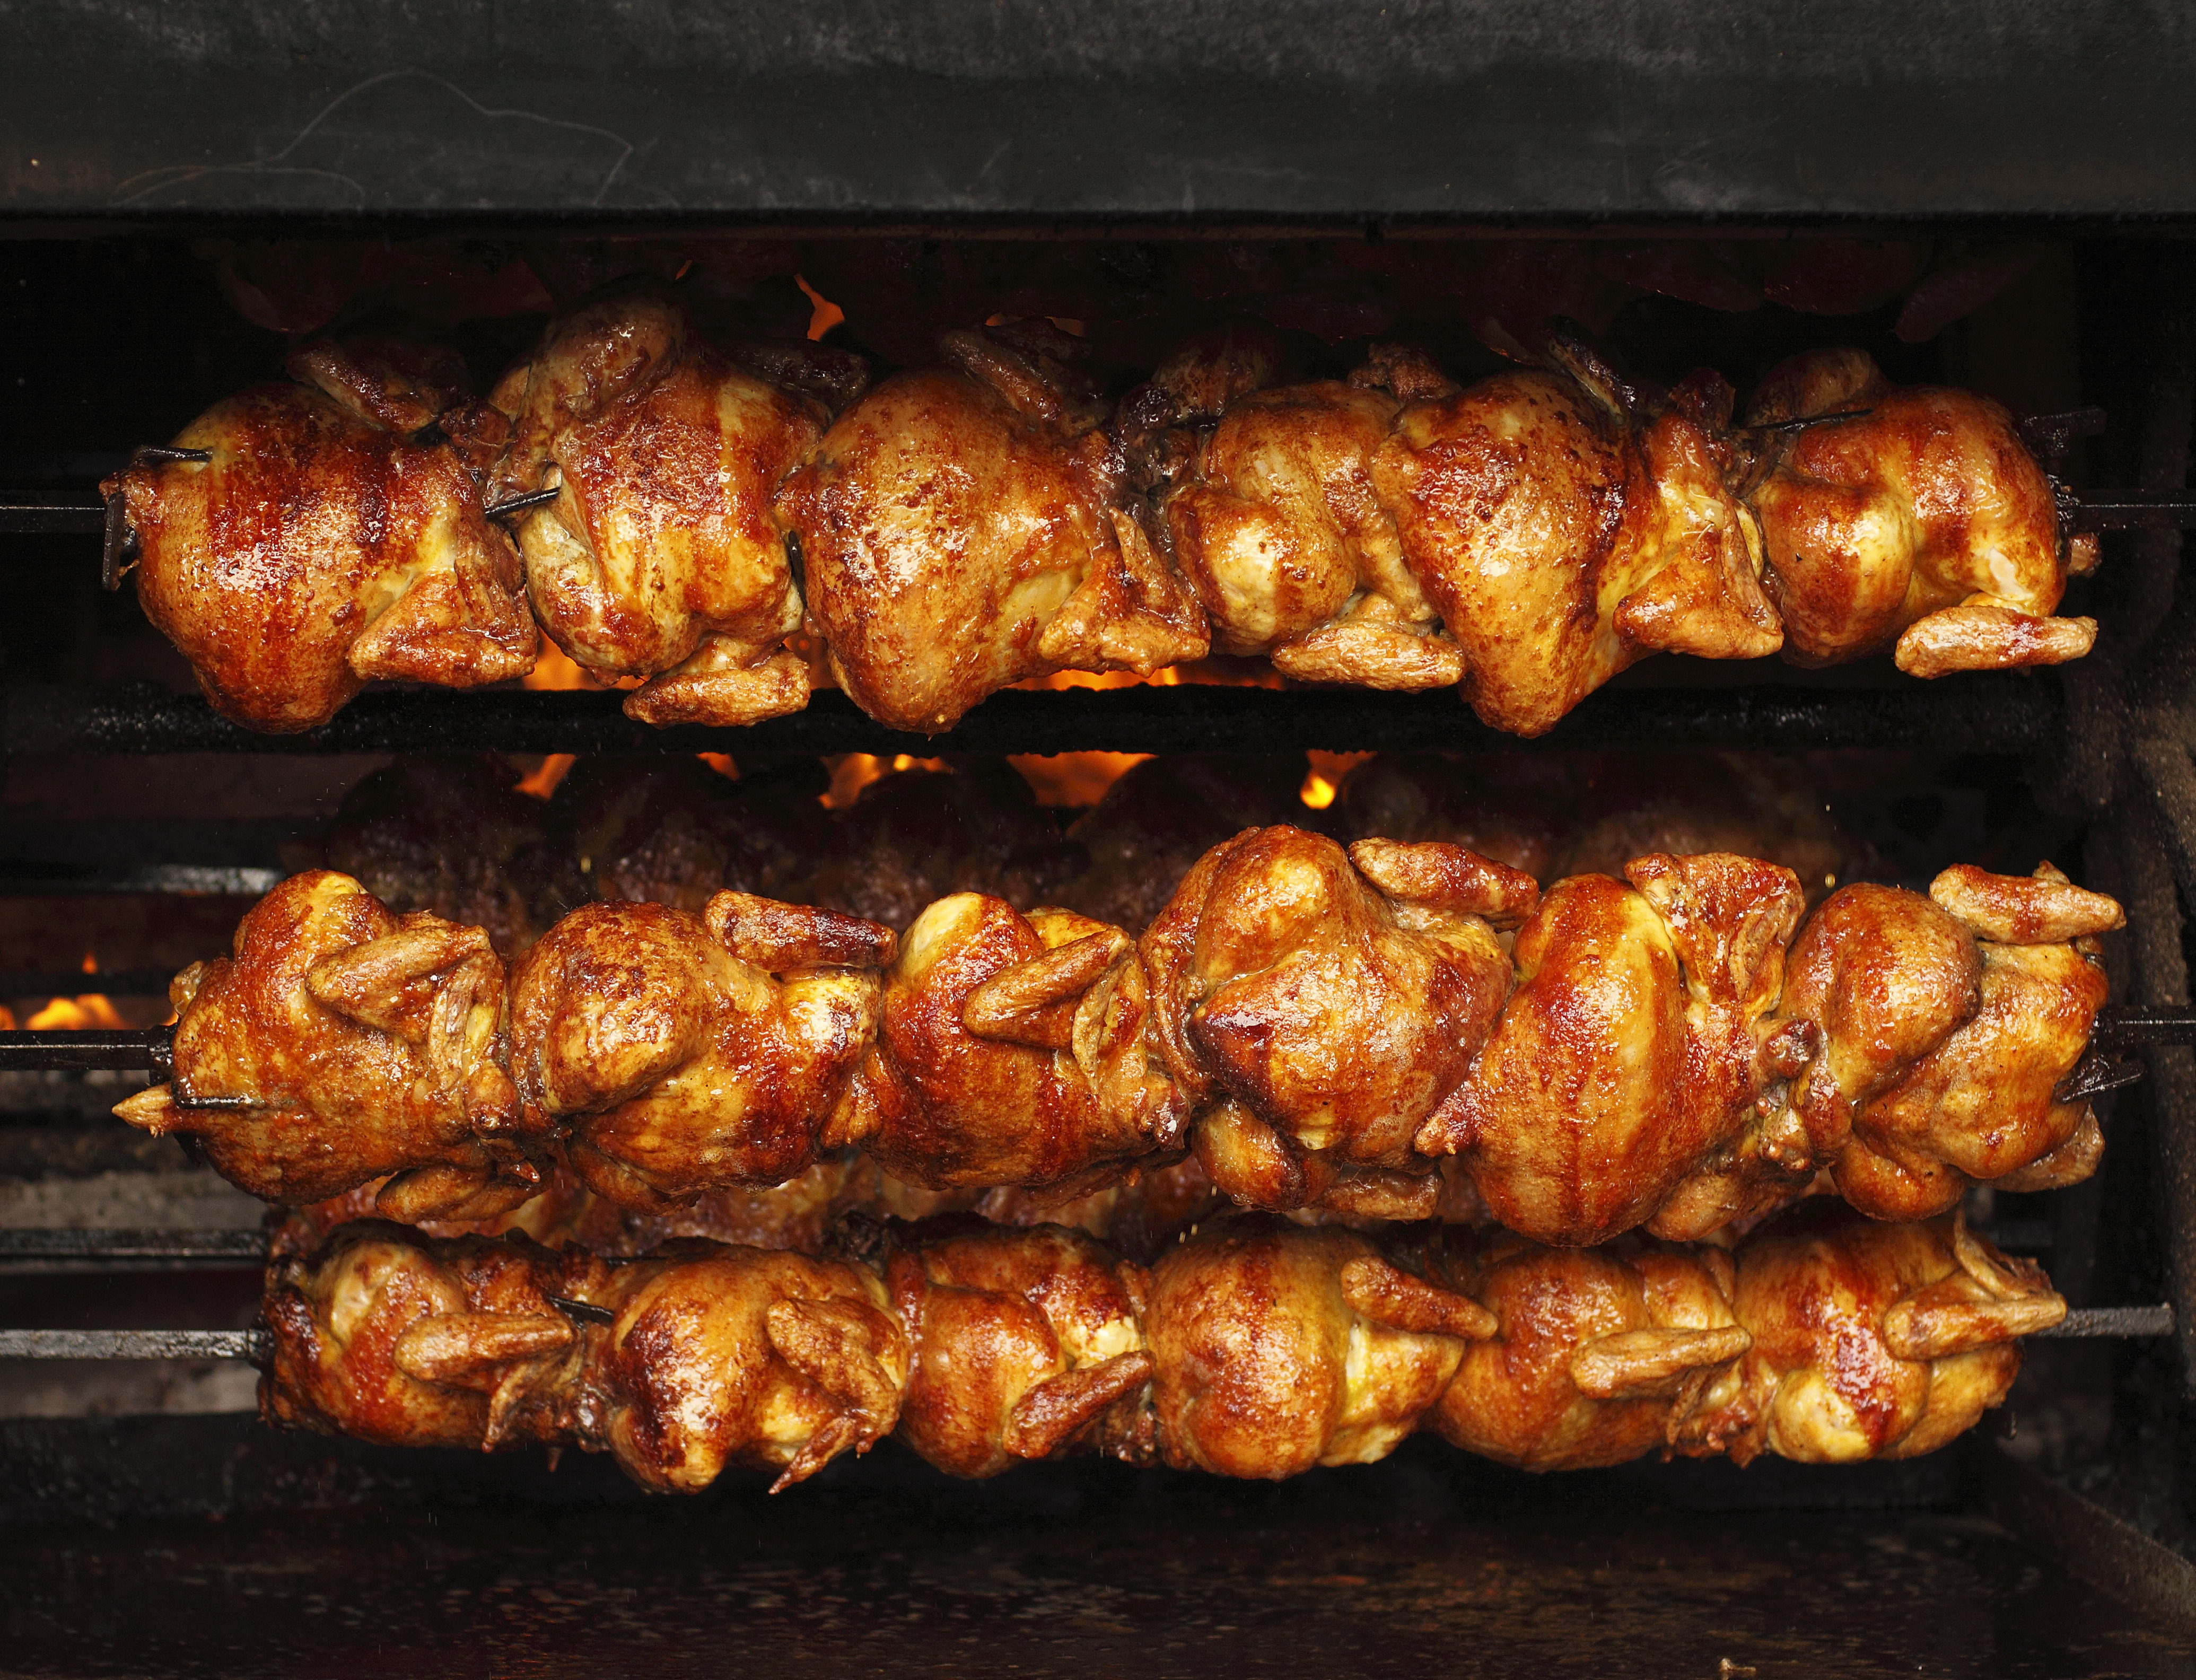 File:Roasted chickens.jpg - Wikimedia Commons